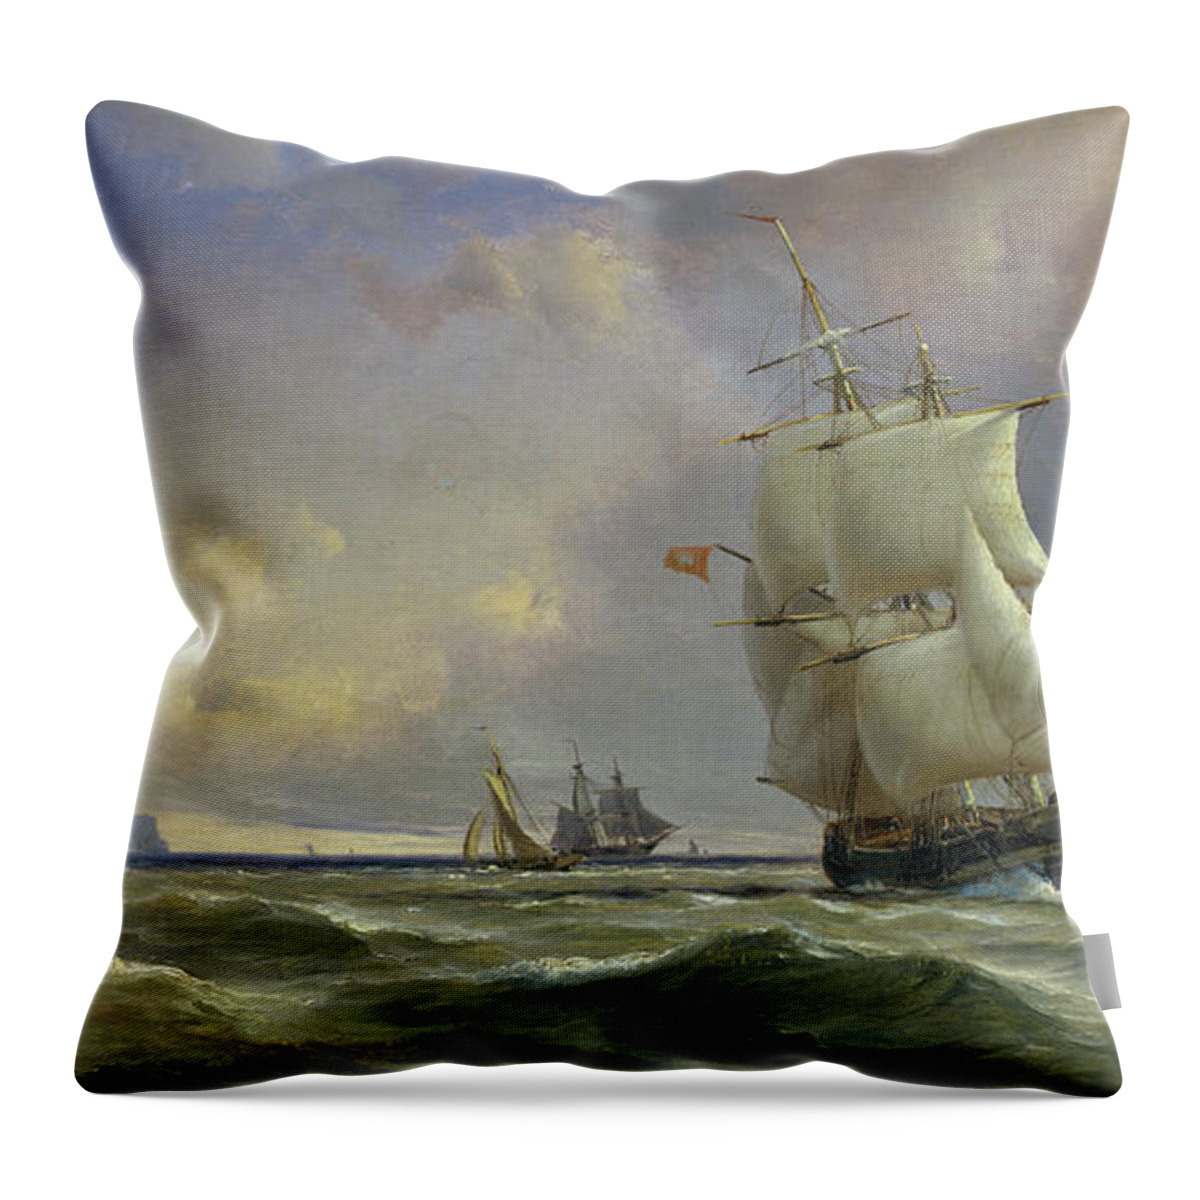 The Throw Pillow featuring the painting The Gathering Storm by Anton Melbye